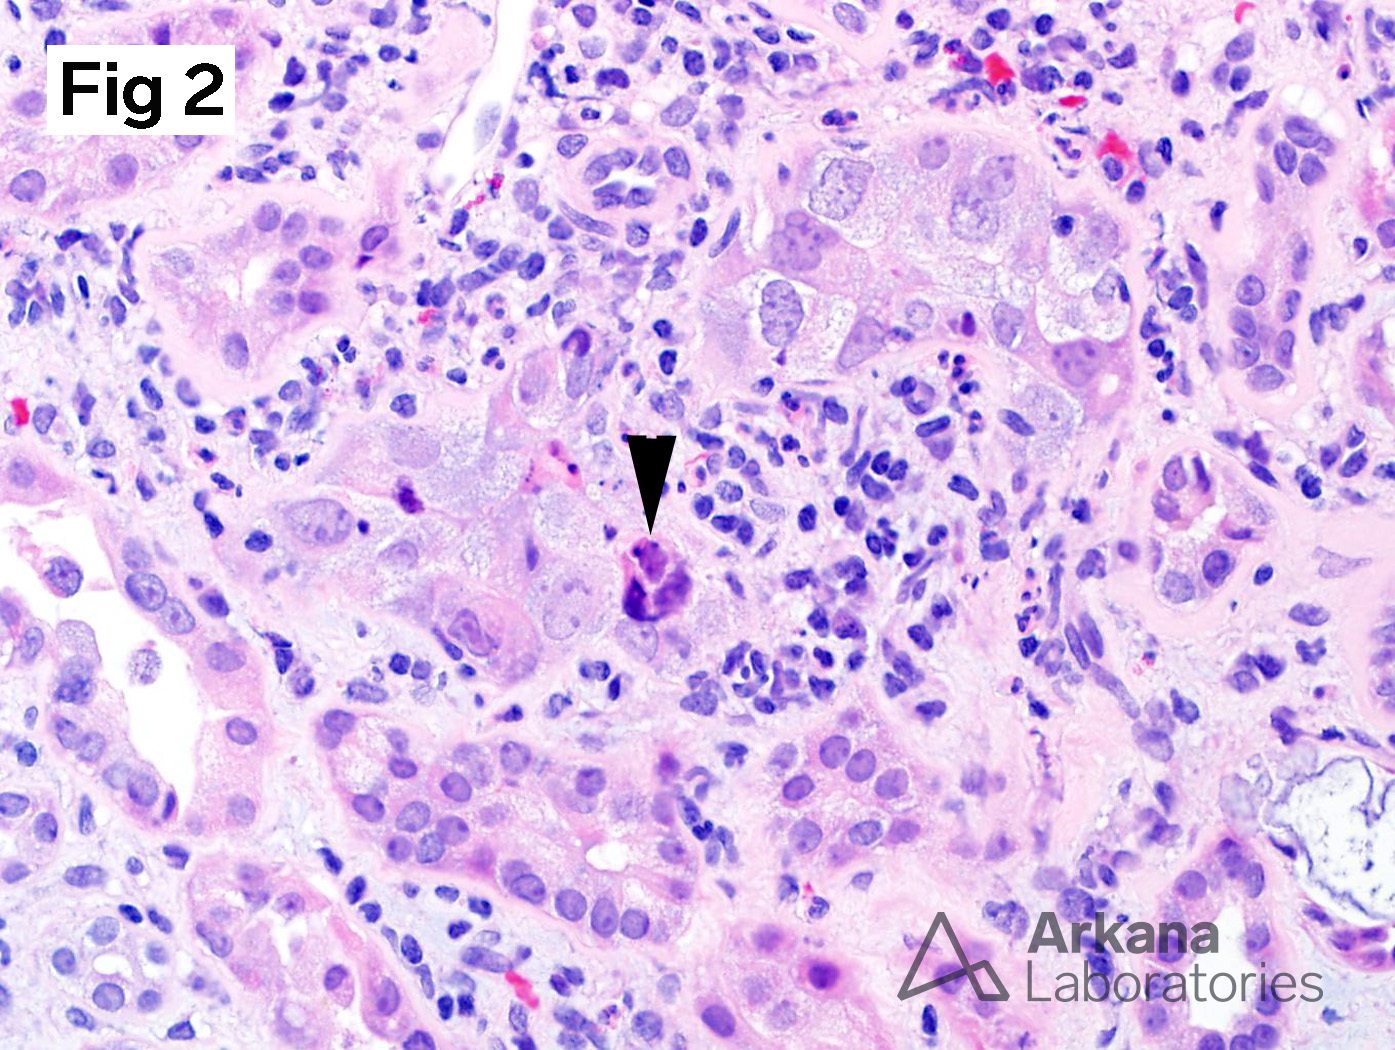 atypical nuclei including an apoptotic body